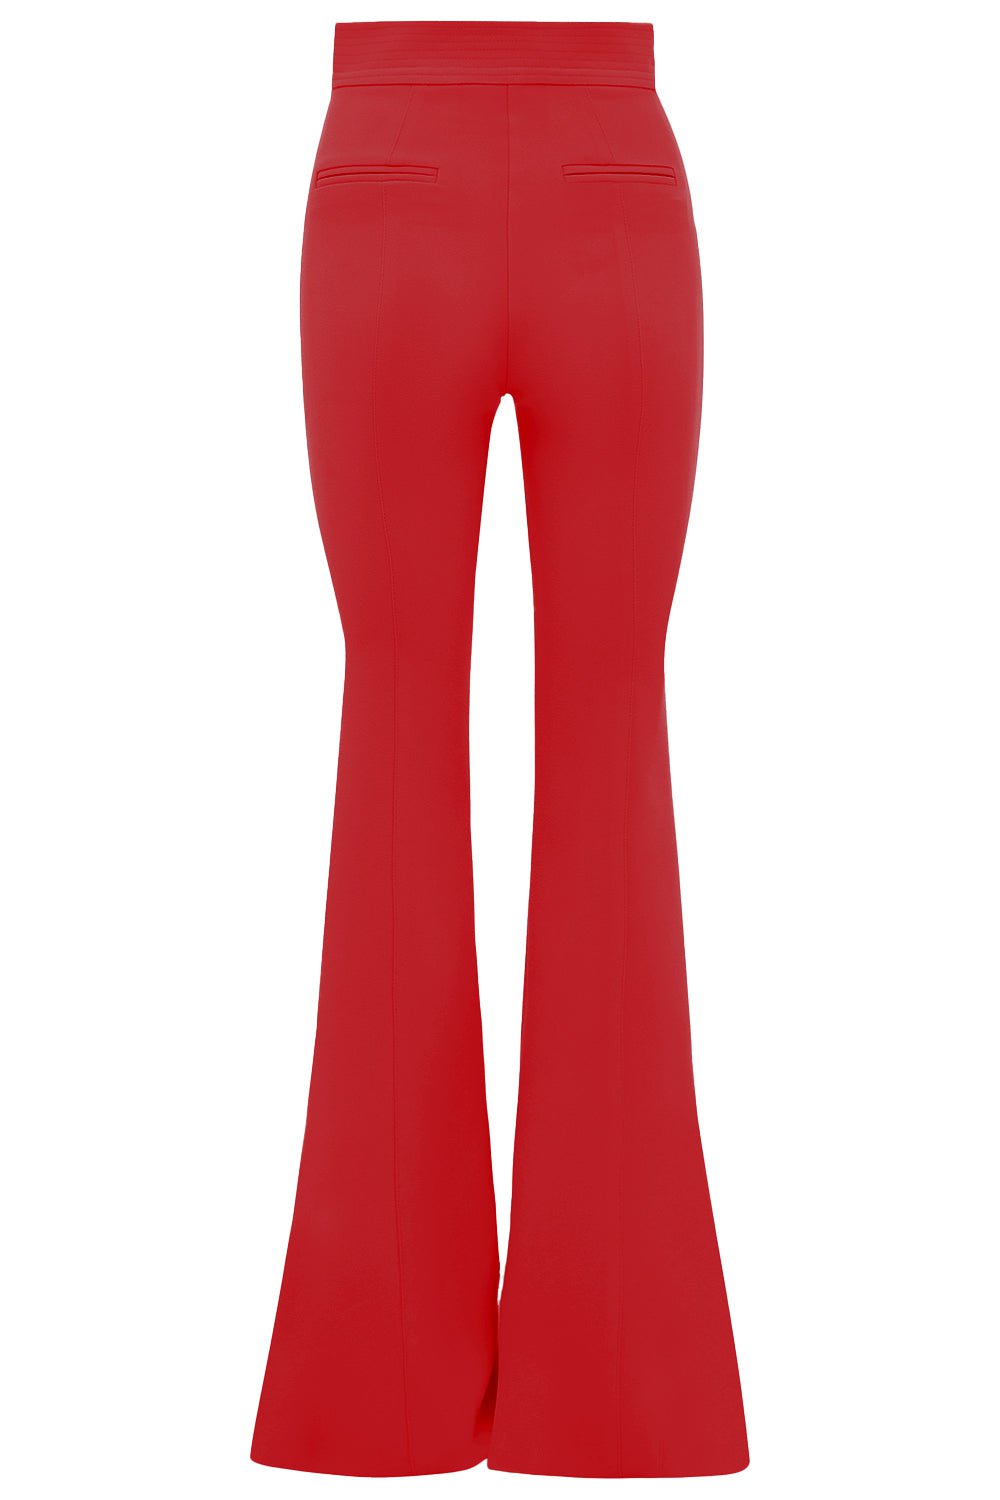 ALEX PERRY-Marden Pant - Red-